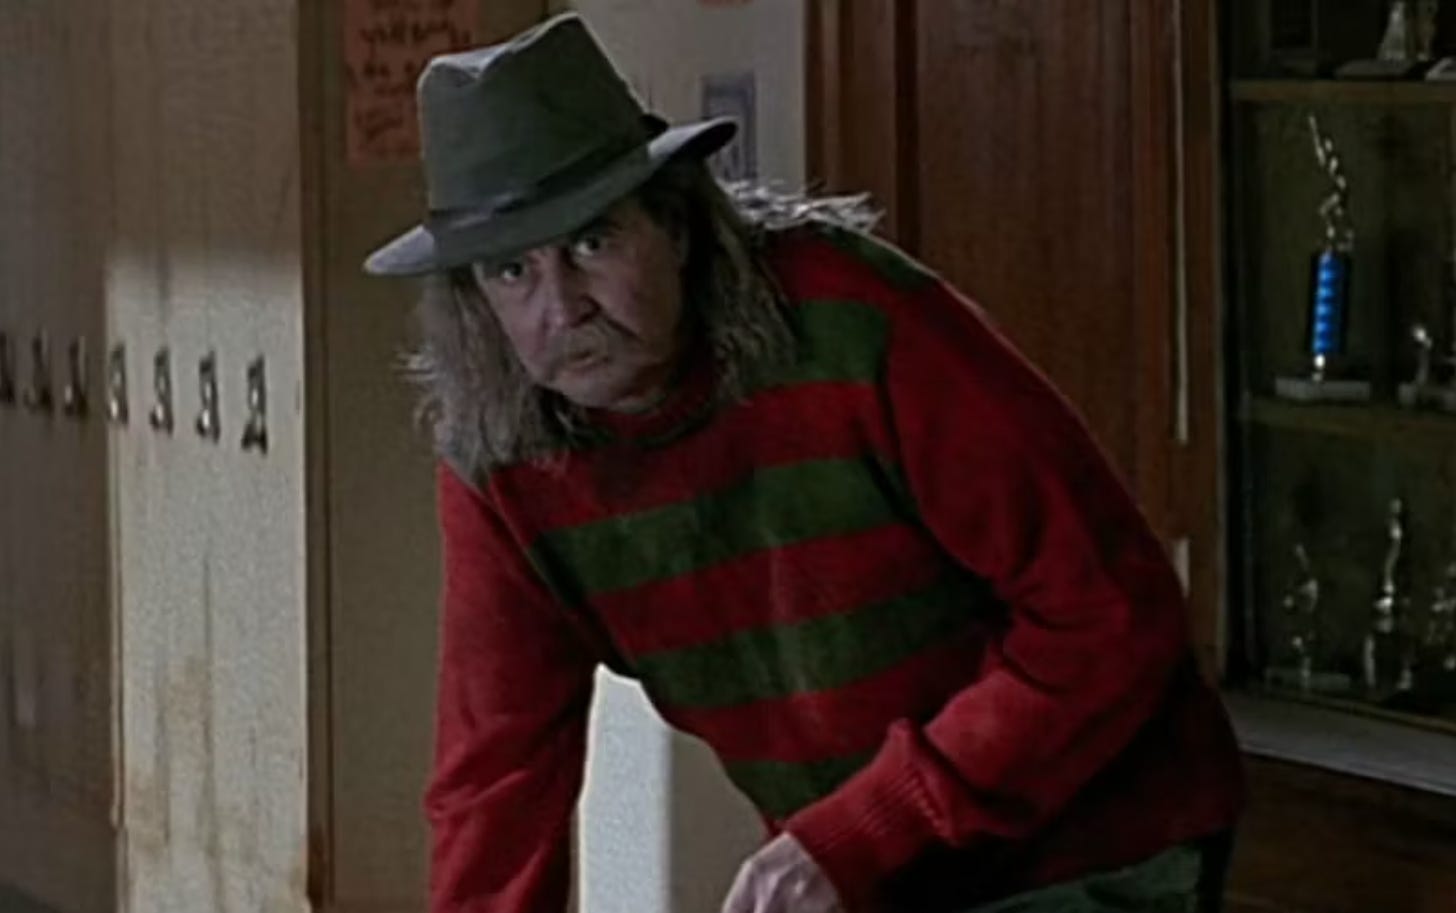 Wes Craven as a janitor dressed as Freddy Krueger in Scream.